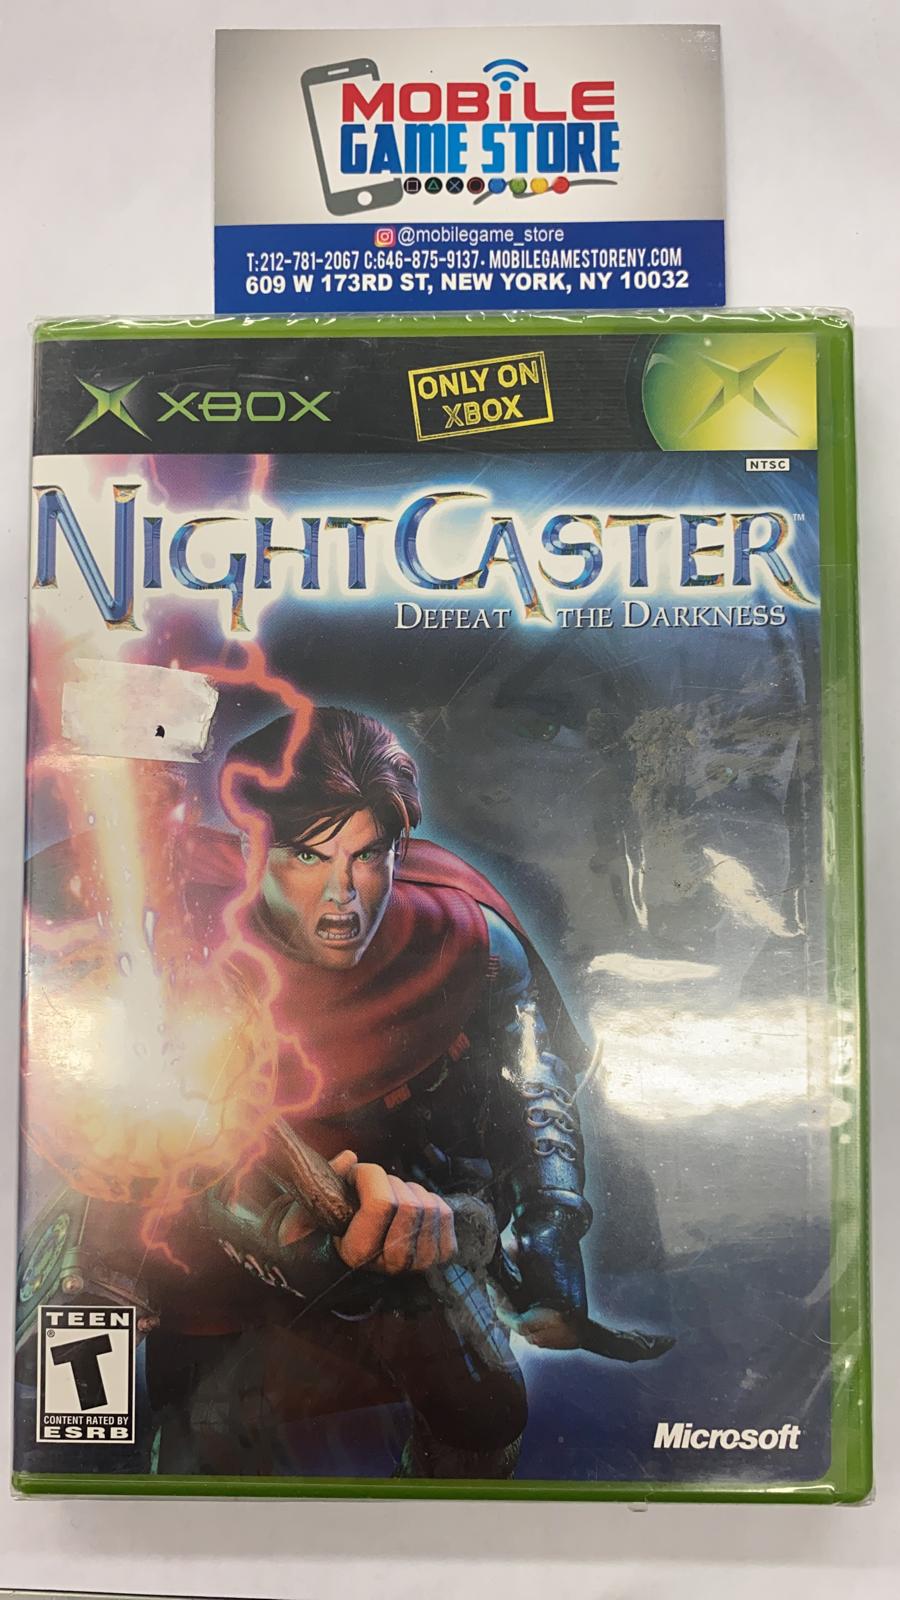 Night caster: Defeat the darkness